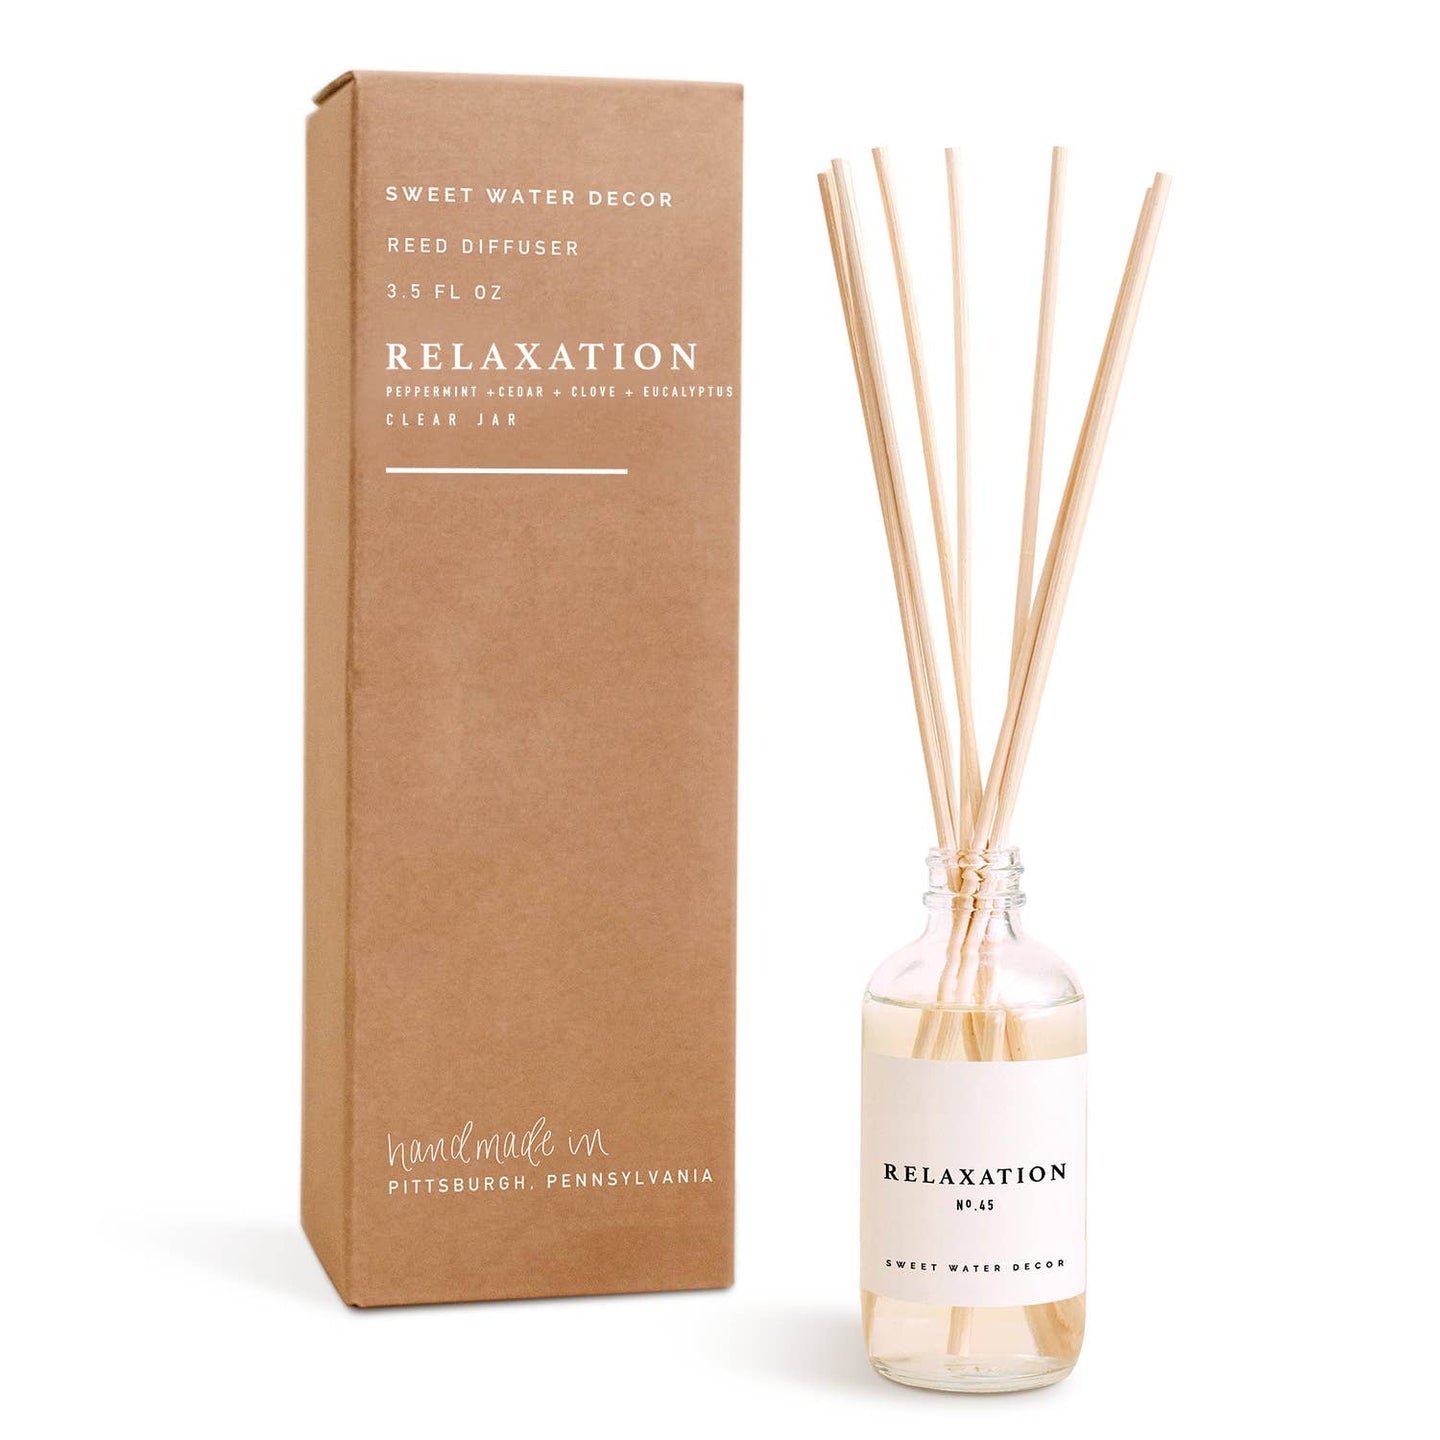 Sweet Water Decor - Relaxation Reed Diffuser - Clear Jar - 3.5 oz